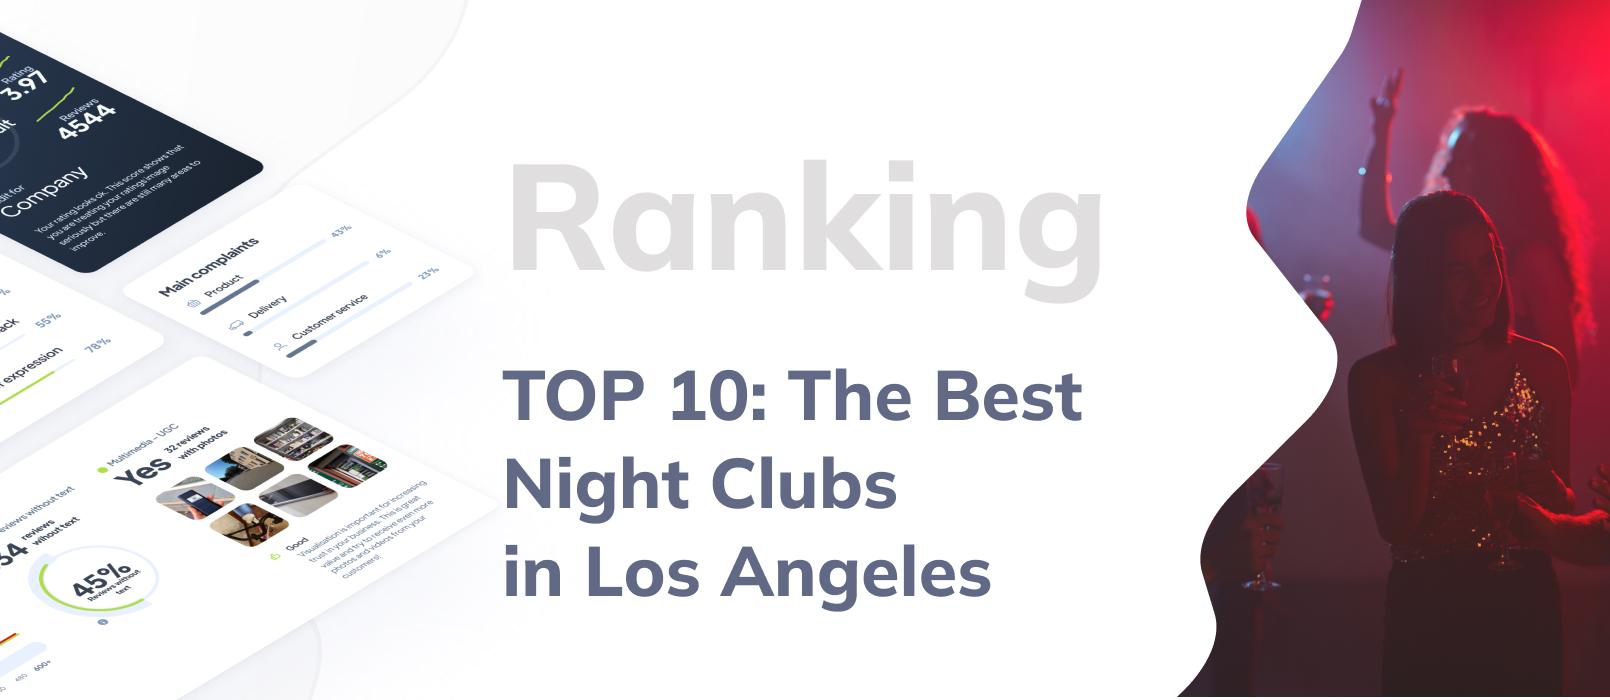 TOP 10 of The Best Night Clubs in Los Angeles - Ranking 